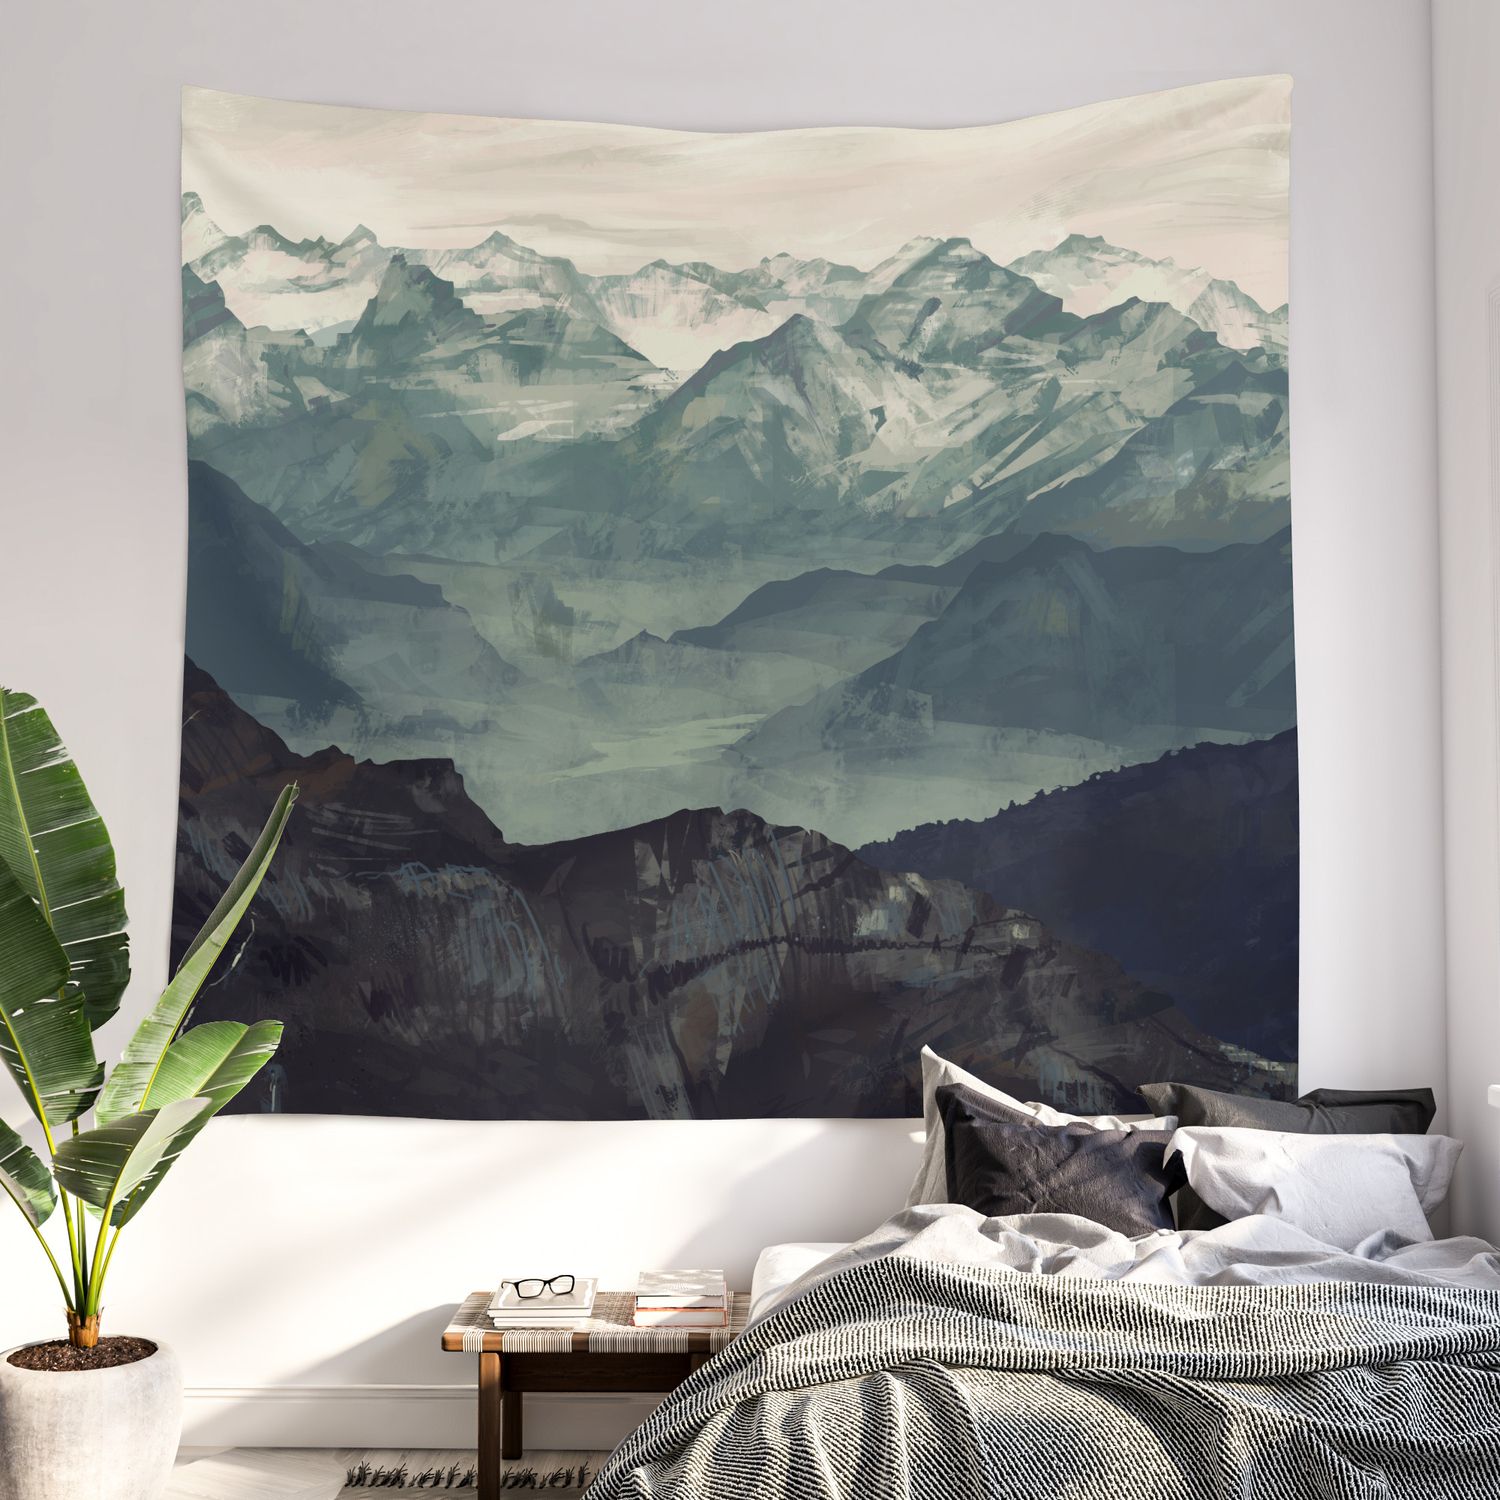 Mountain Fog Wall Tapestrymicaela Dawn | Society6 Inside Mountains In The Fog Wall Art (View 15 of 15)